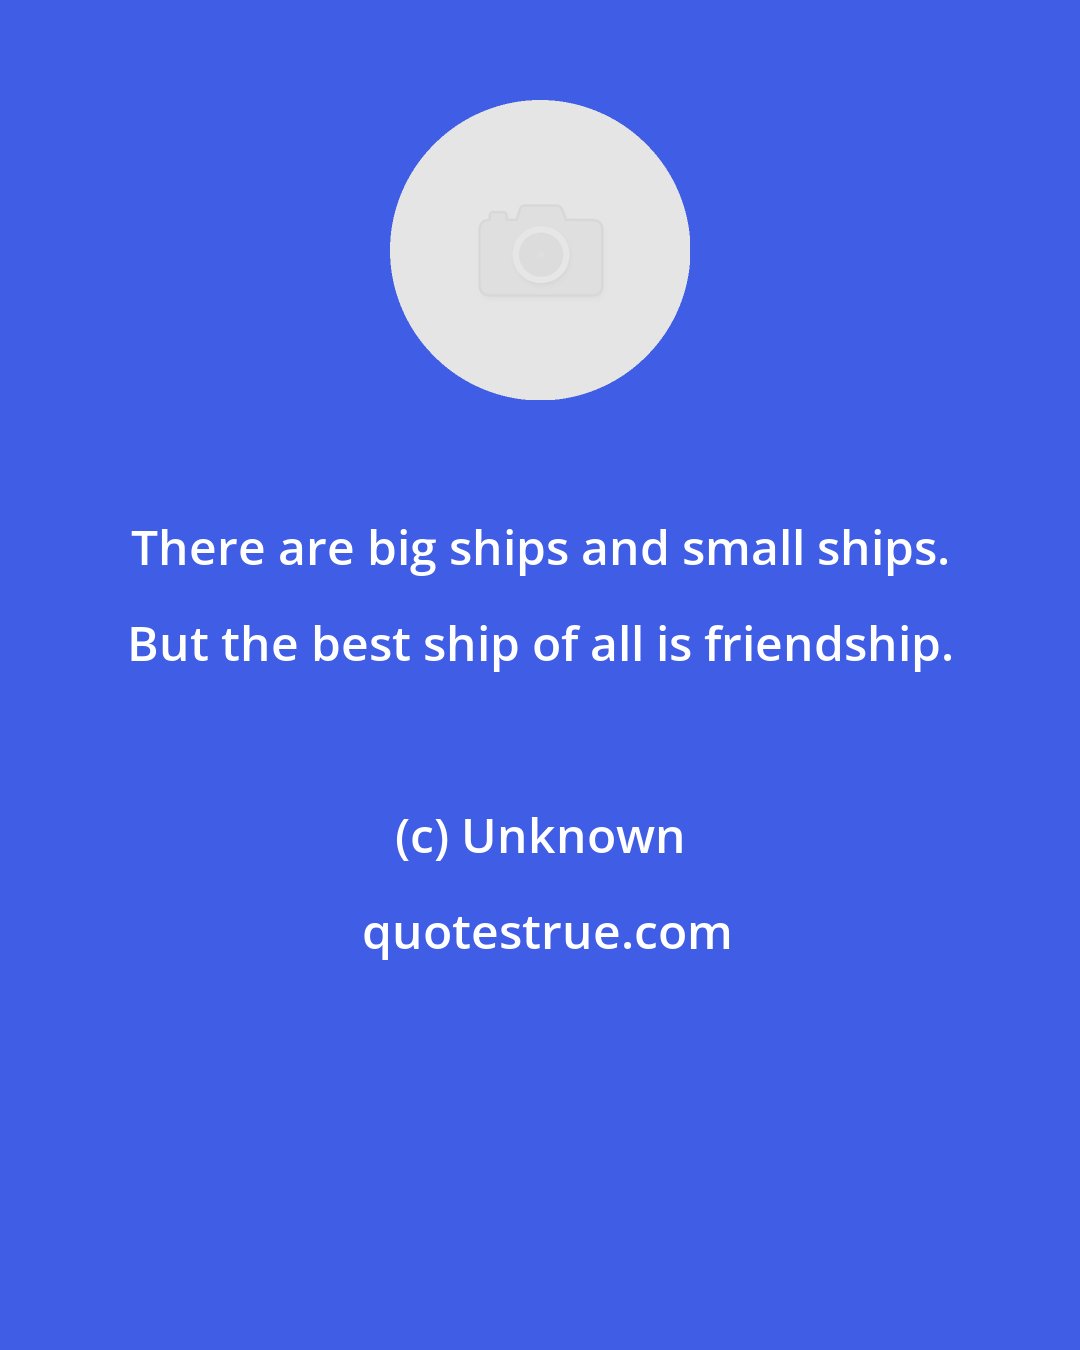 Unknown: There are big ships and small ships. But the best ship of all is friendship.